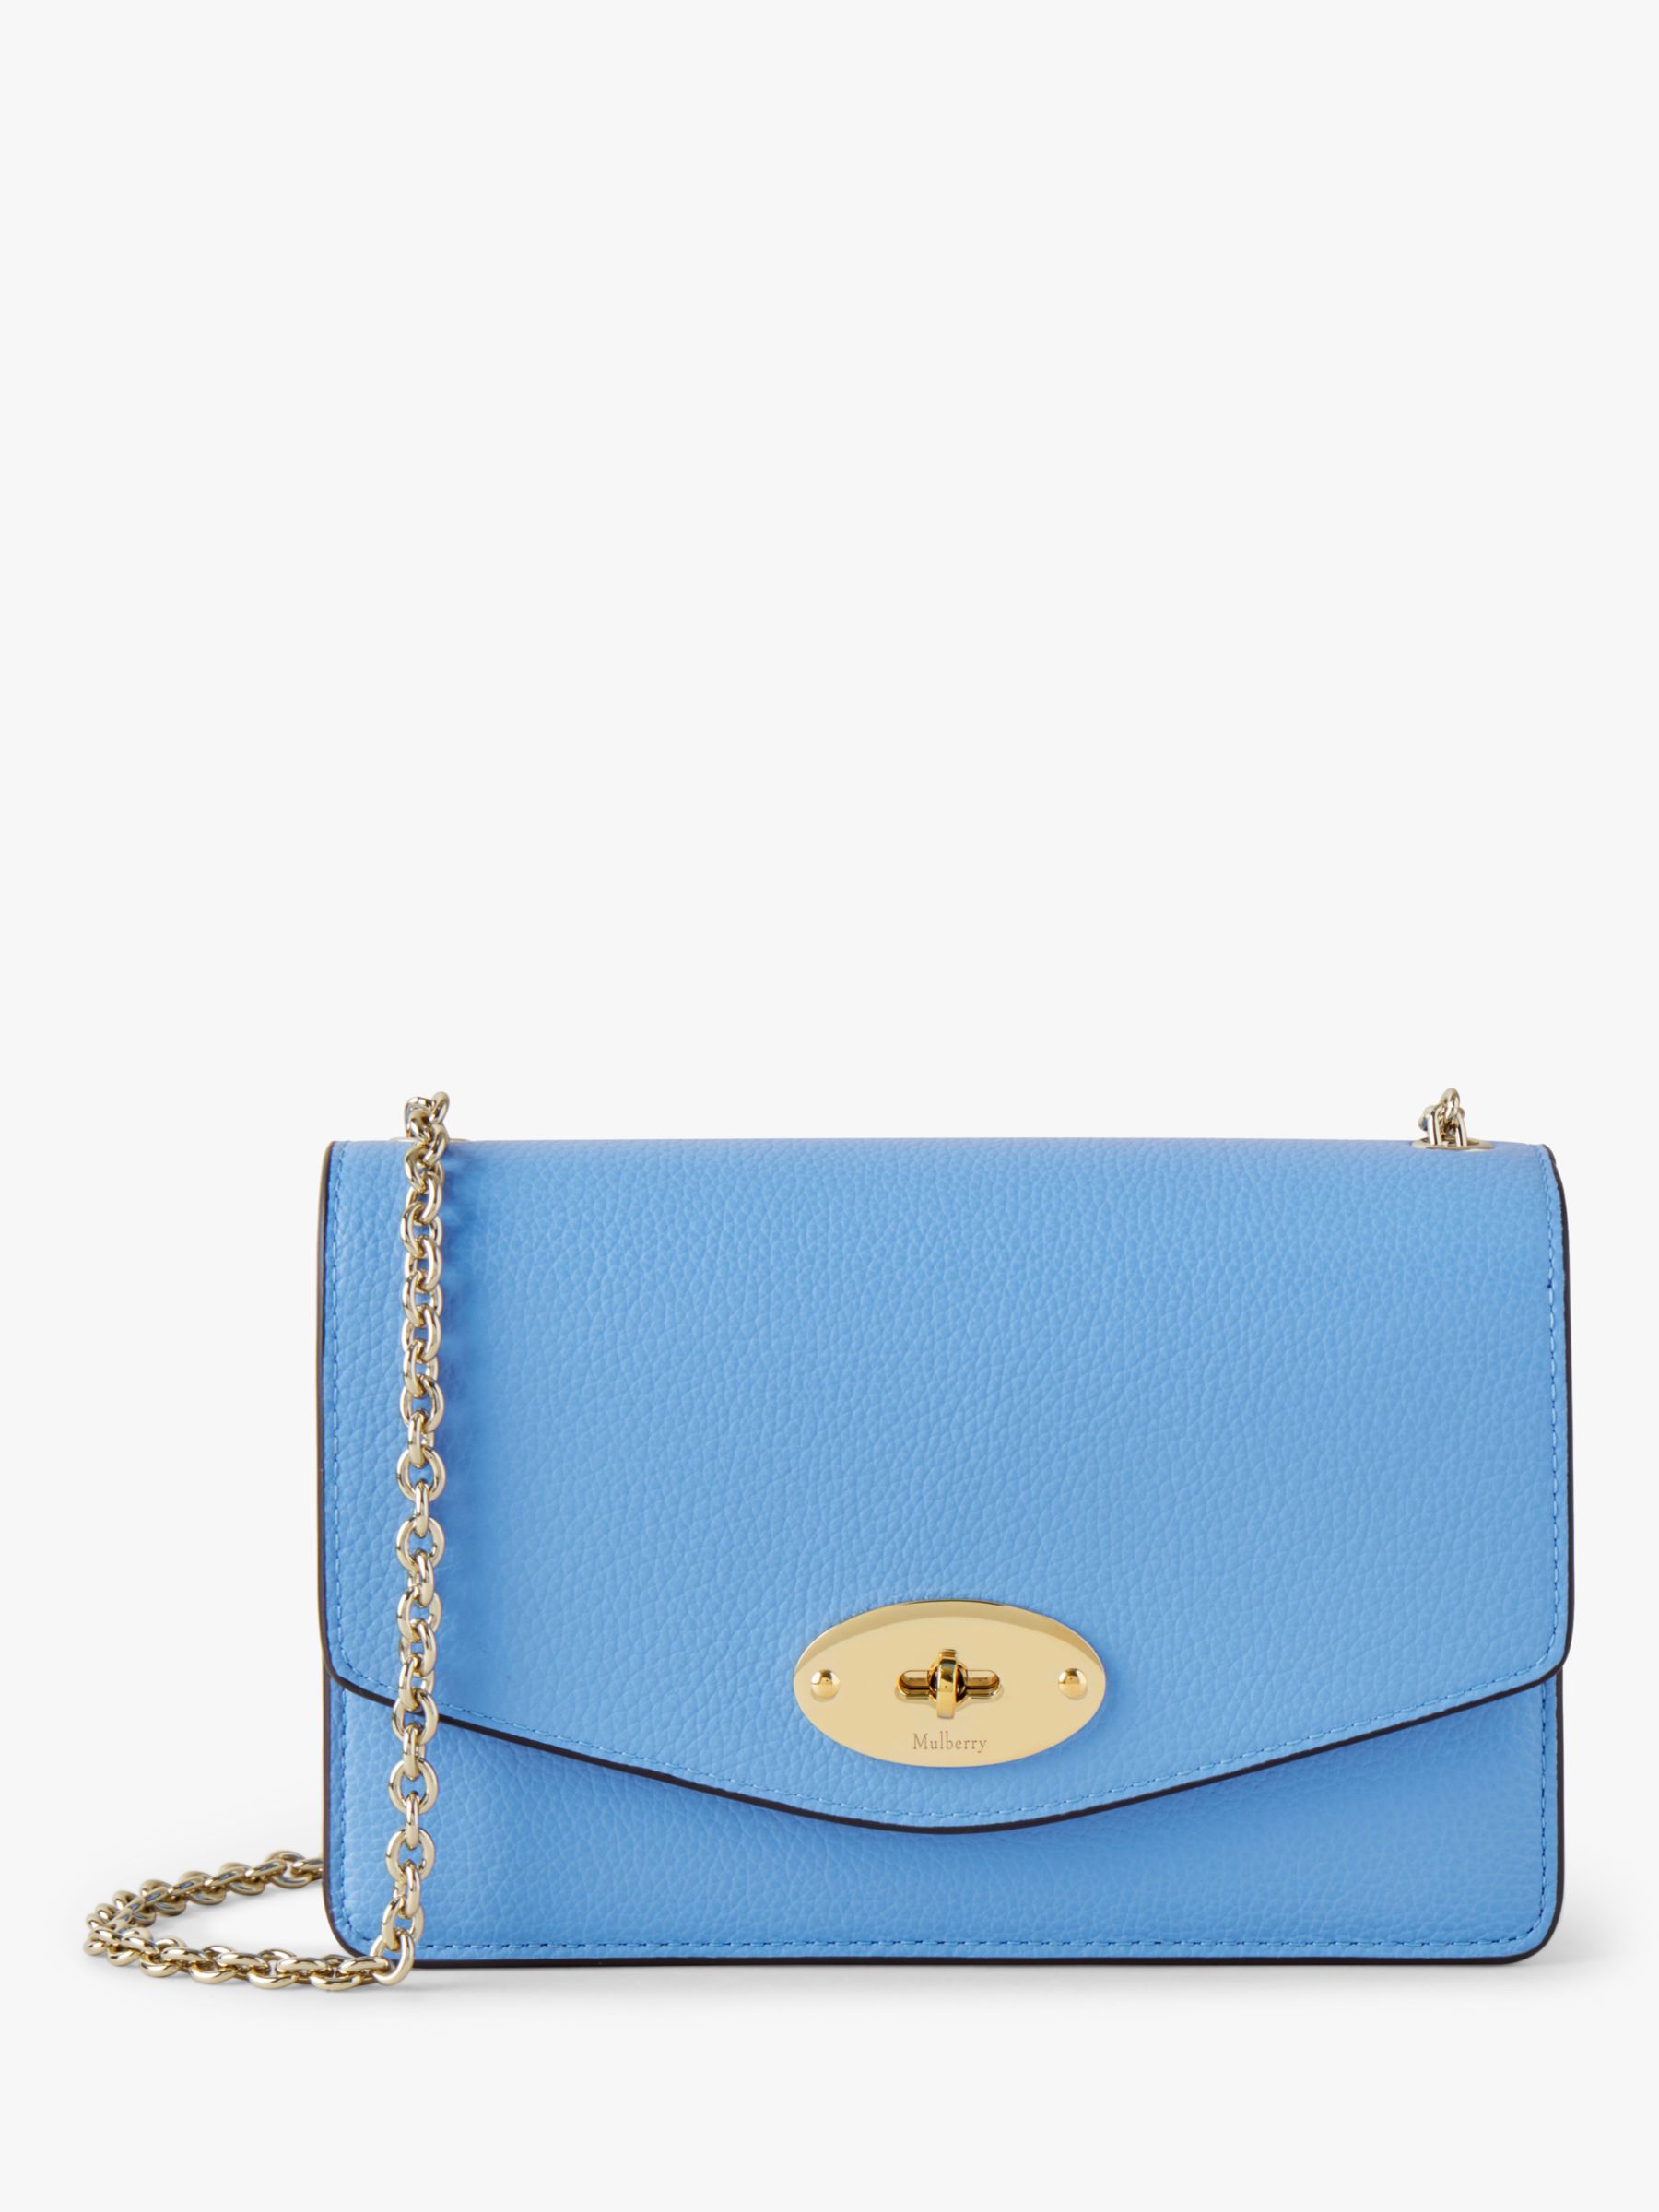 Mulberry Small Darley Small Classic Grain Leather Cross Body Bag ...